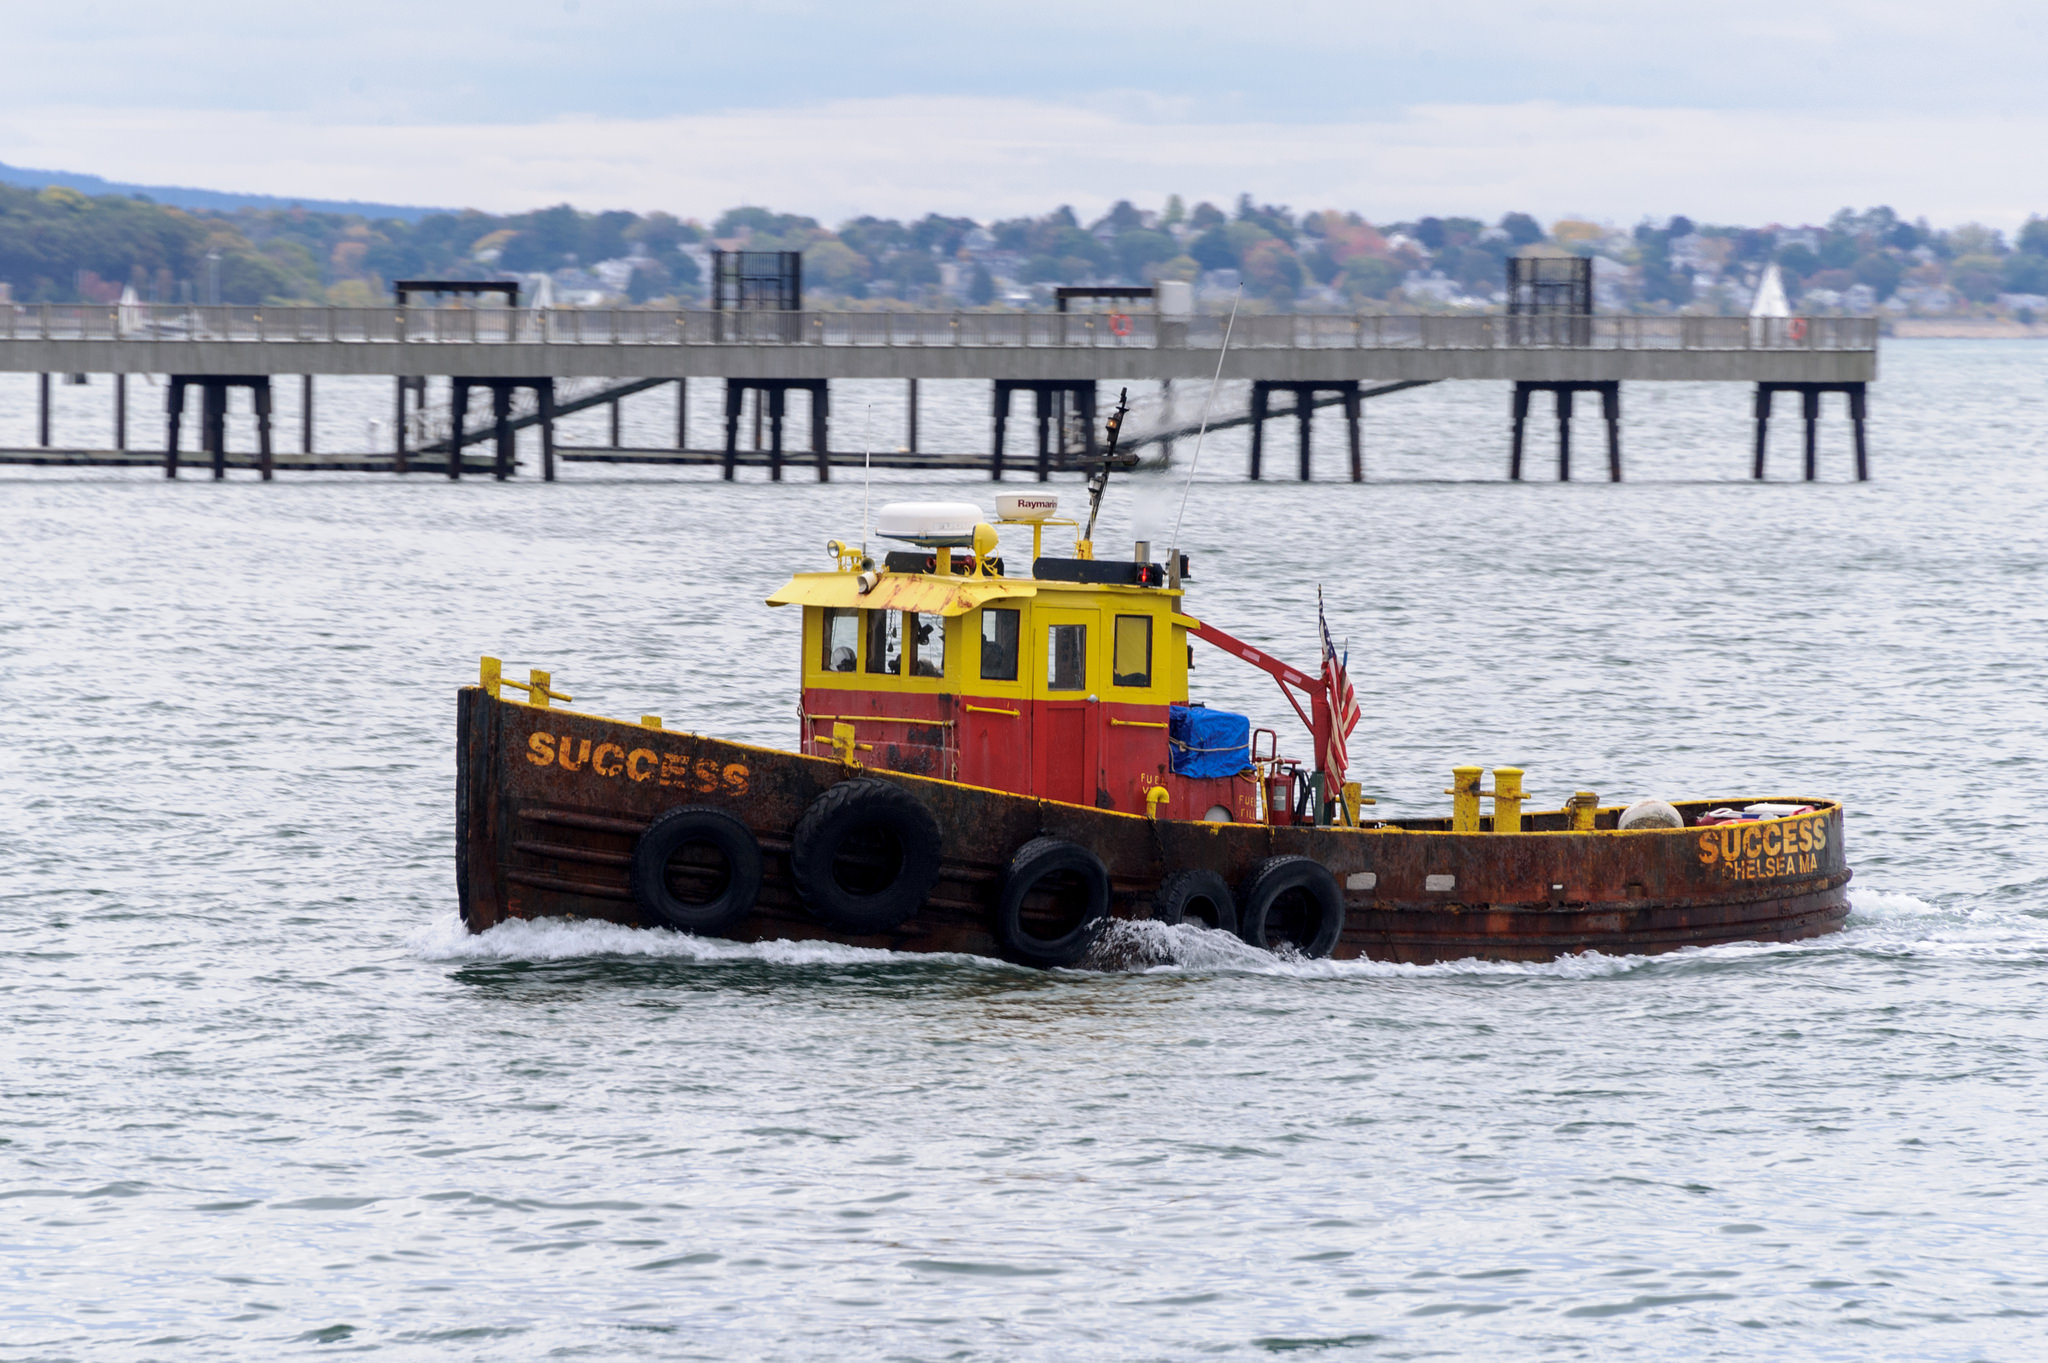 A tugboat called Success, published to 